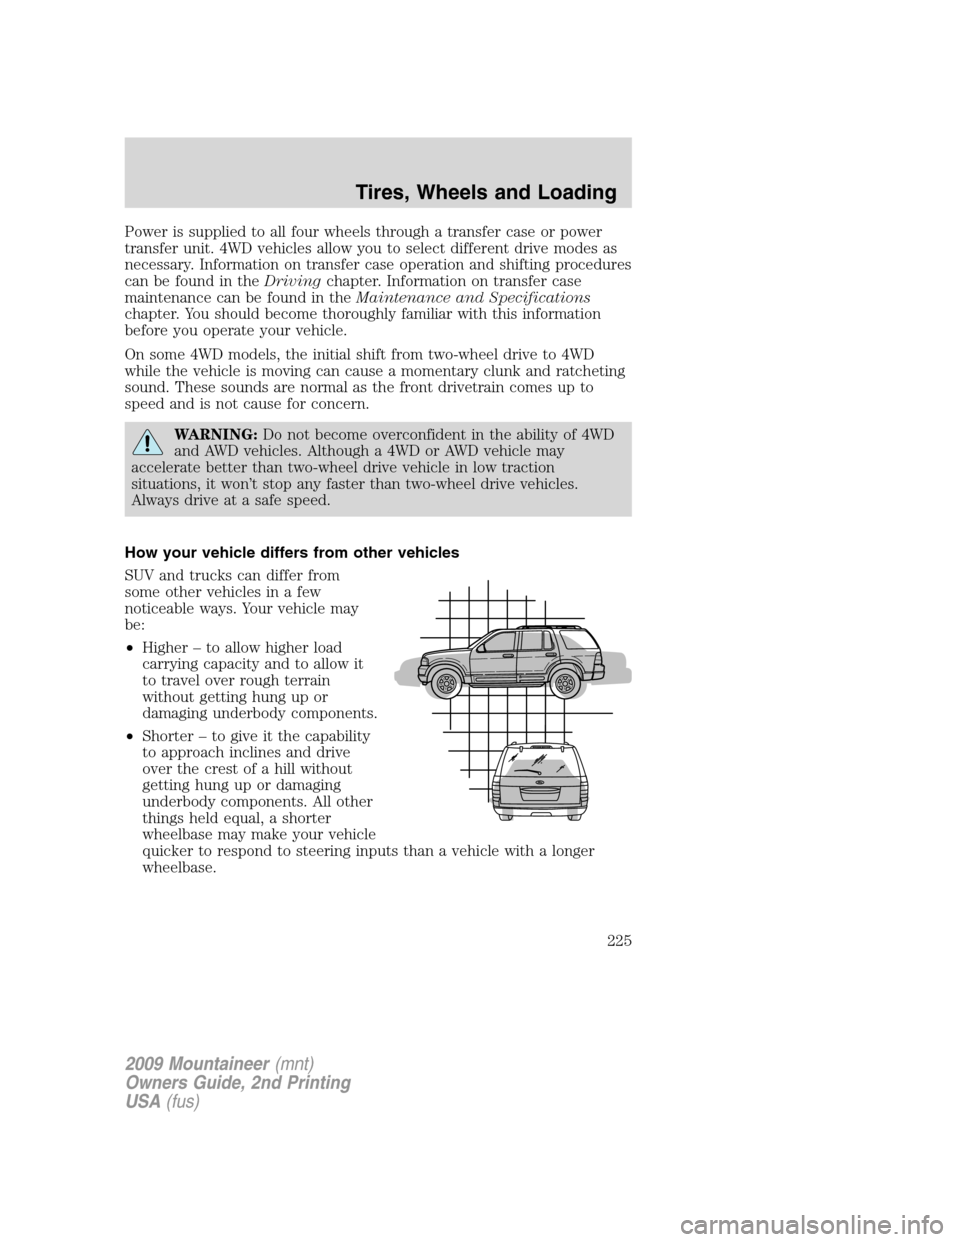 Mercury Mountaineer 2009  Owners Manuals Power is supplied to all four wheels through a transfer case or power
transfer unit. 4WD vehicles allow you to select different drive modes as
necessary. Information on transfer case operation and shi